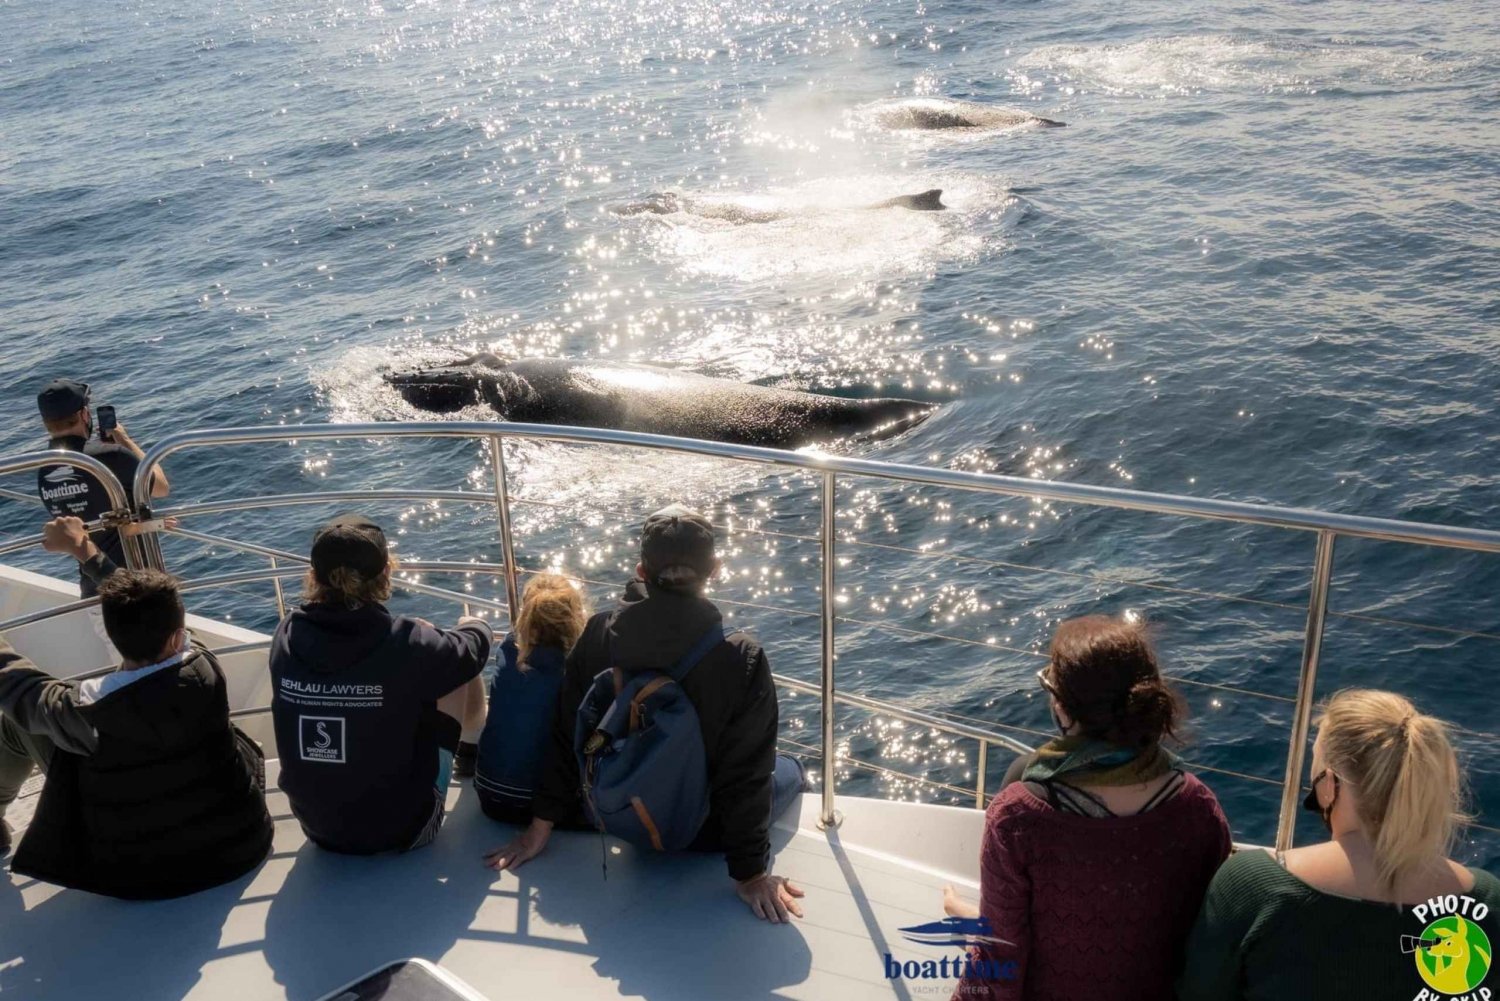 Unforgettable Luxury Whale Watching Experience